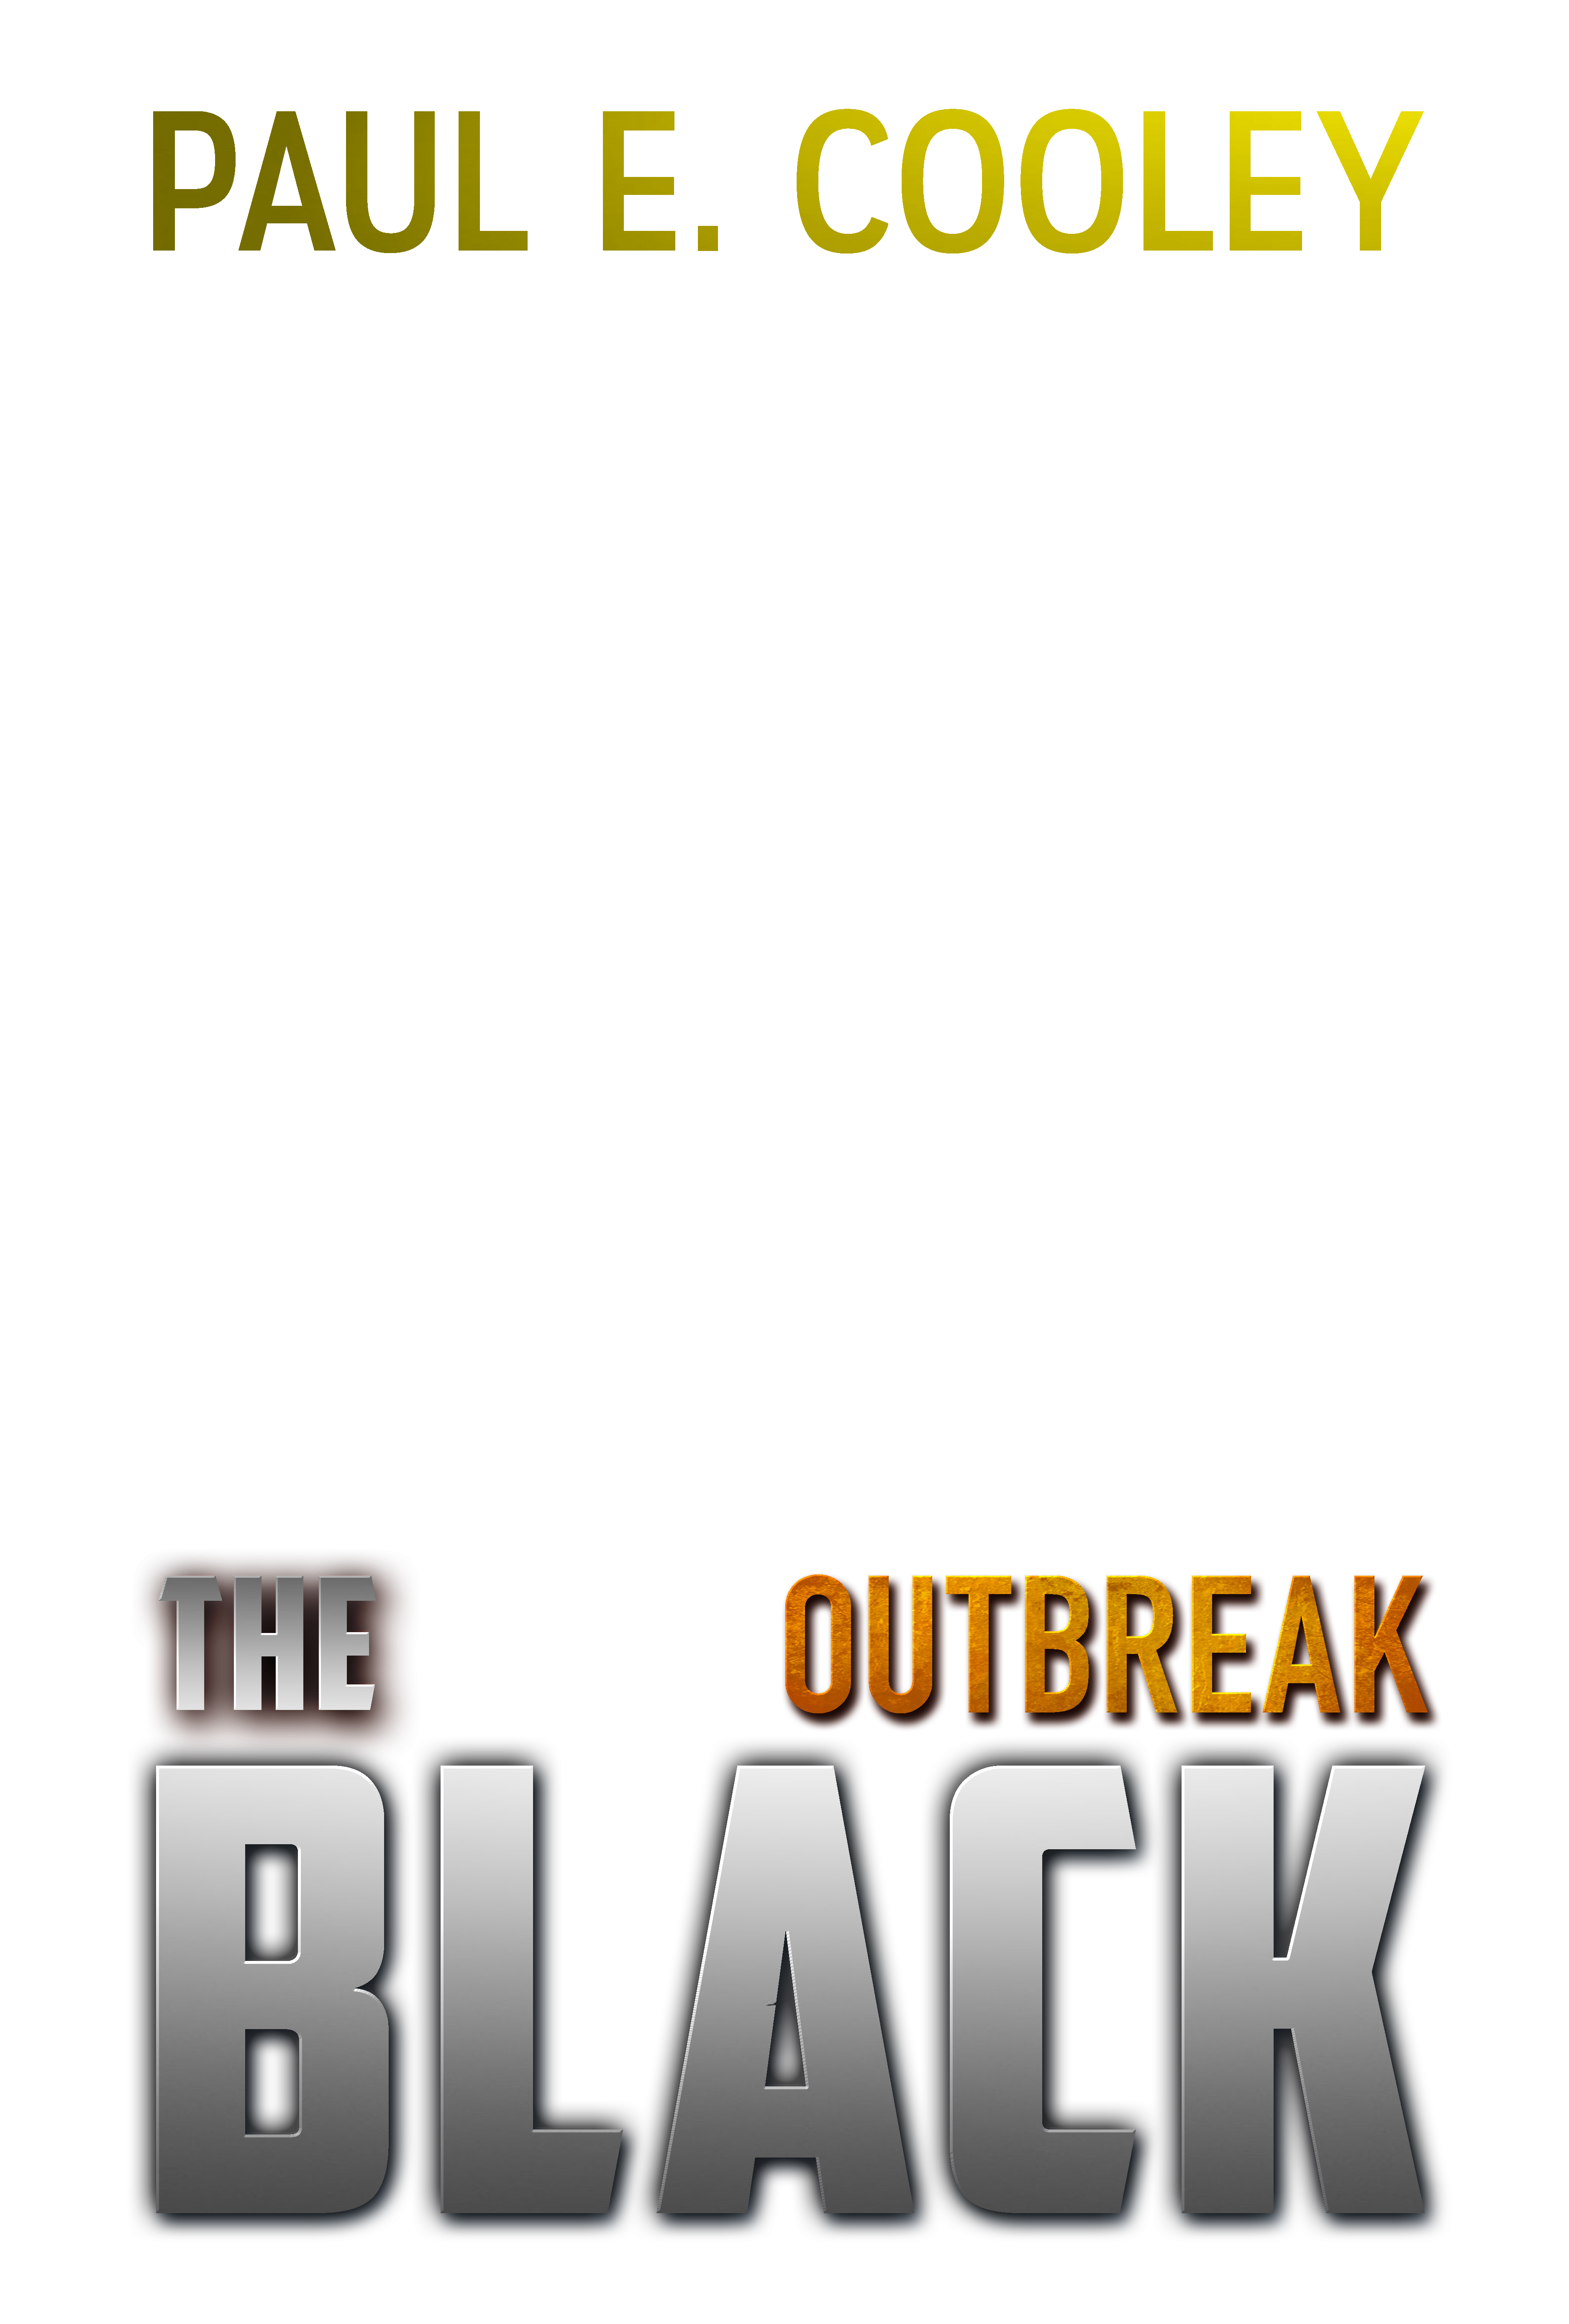 Front - The Black Outbreak - Cooley - Rev 02